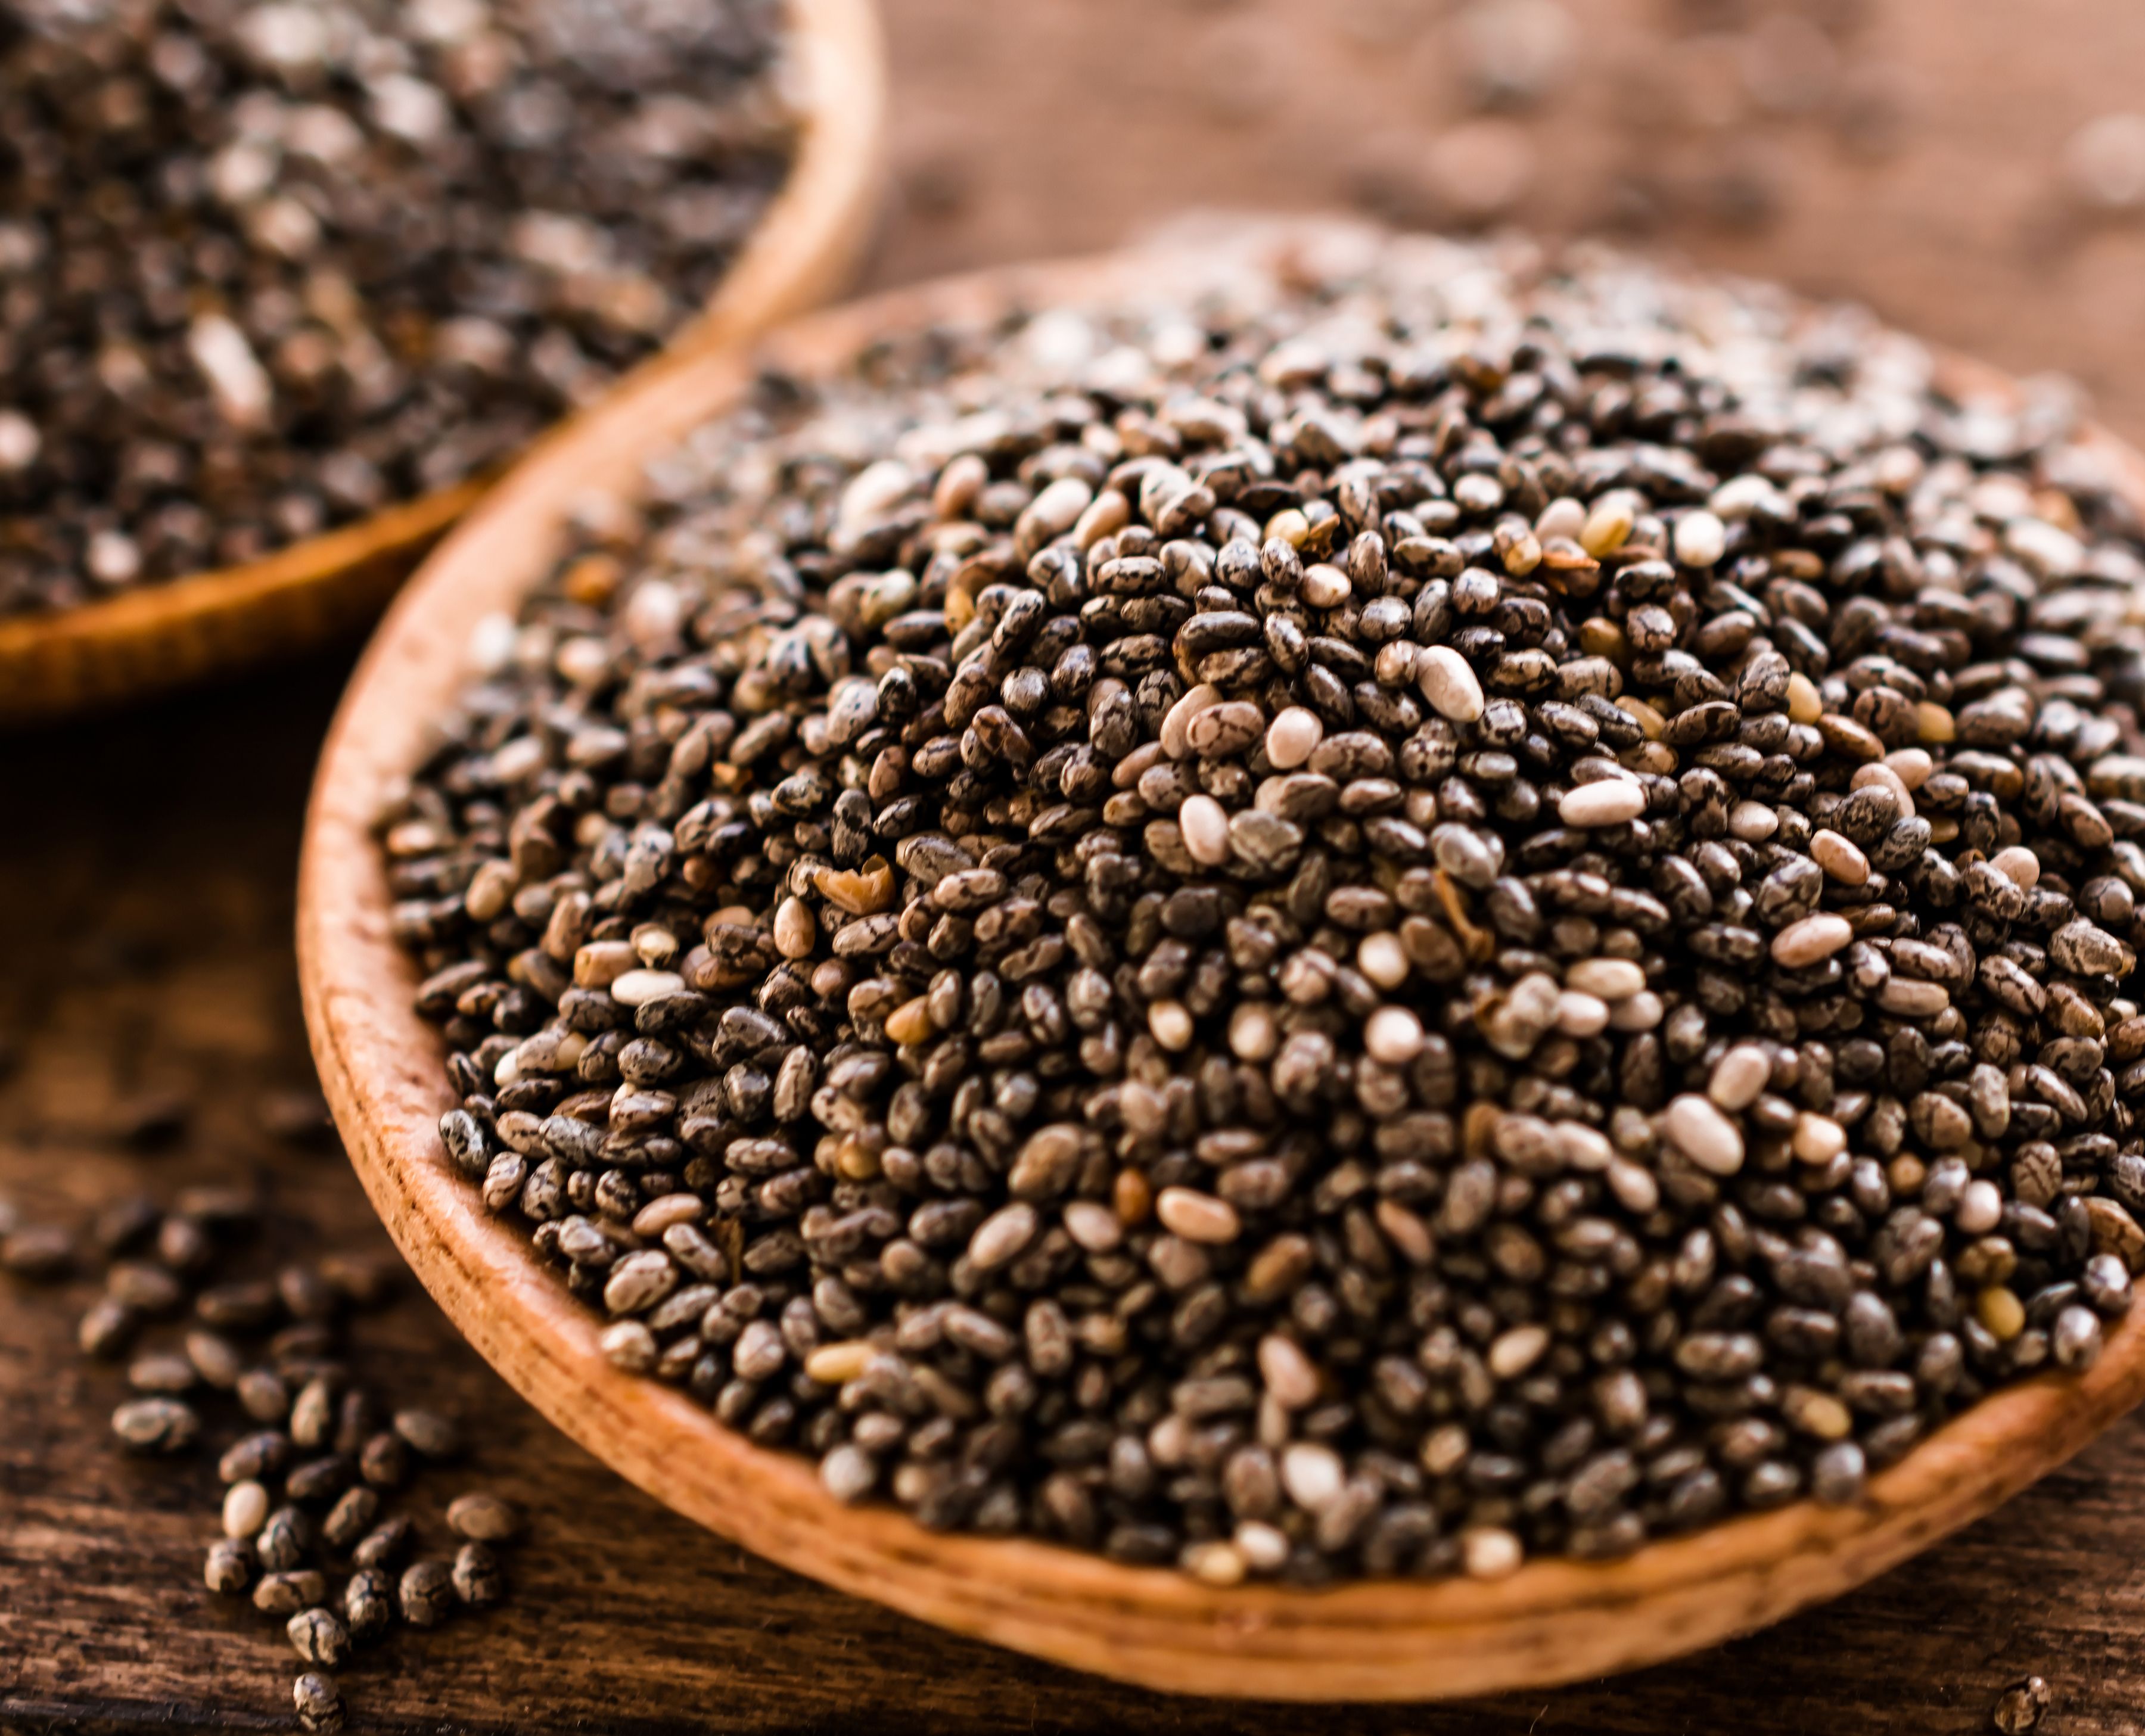 Can Chia Help With Weight Loss?, Nutrition